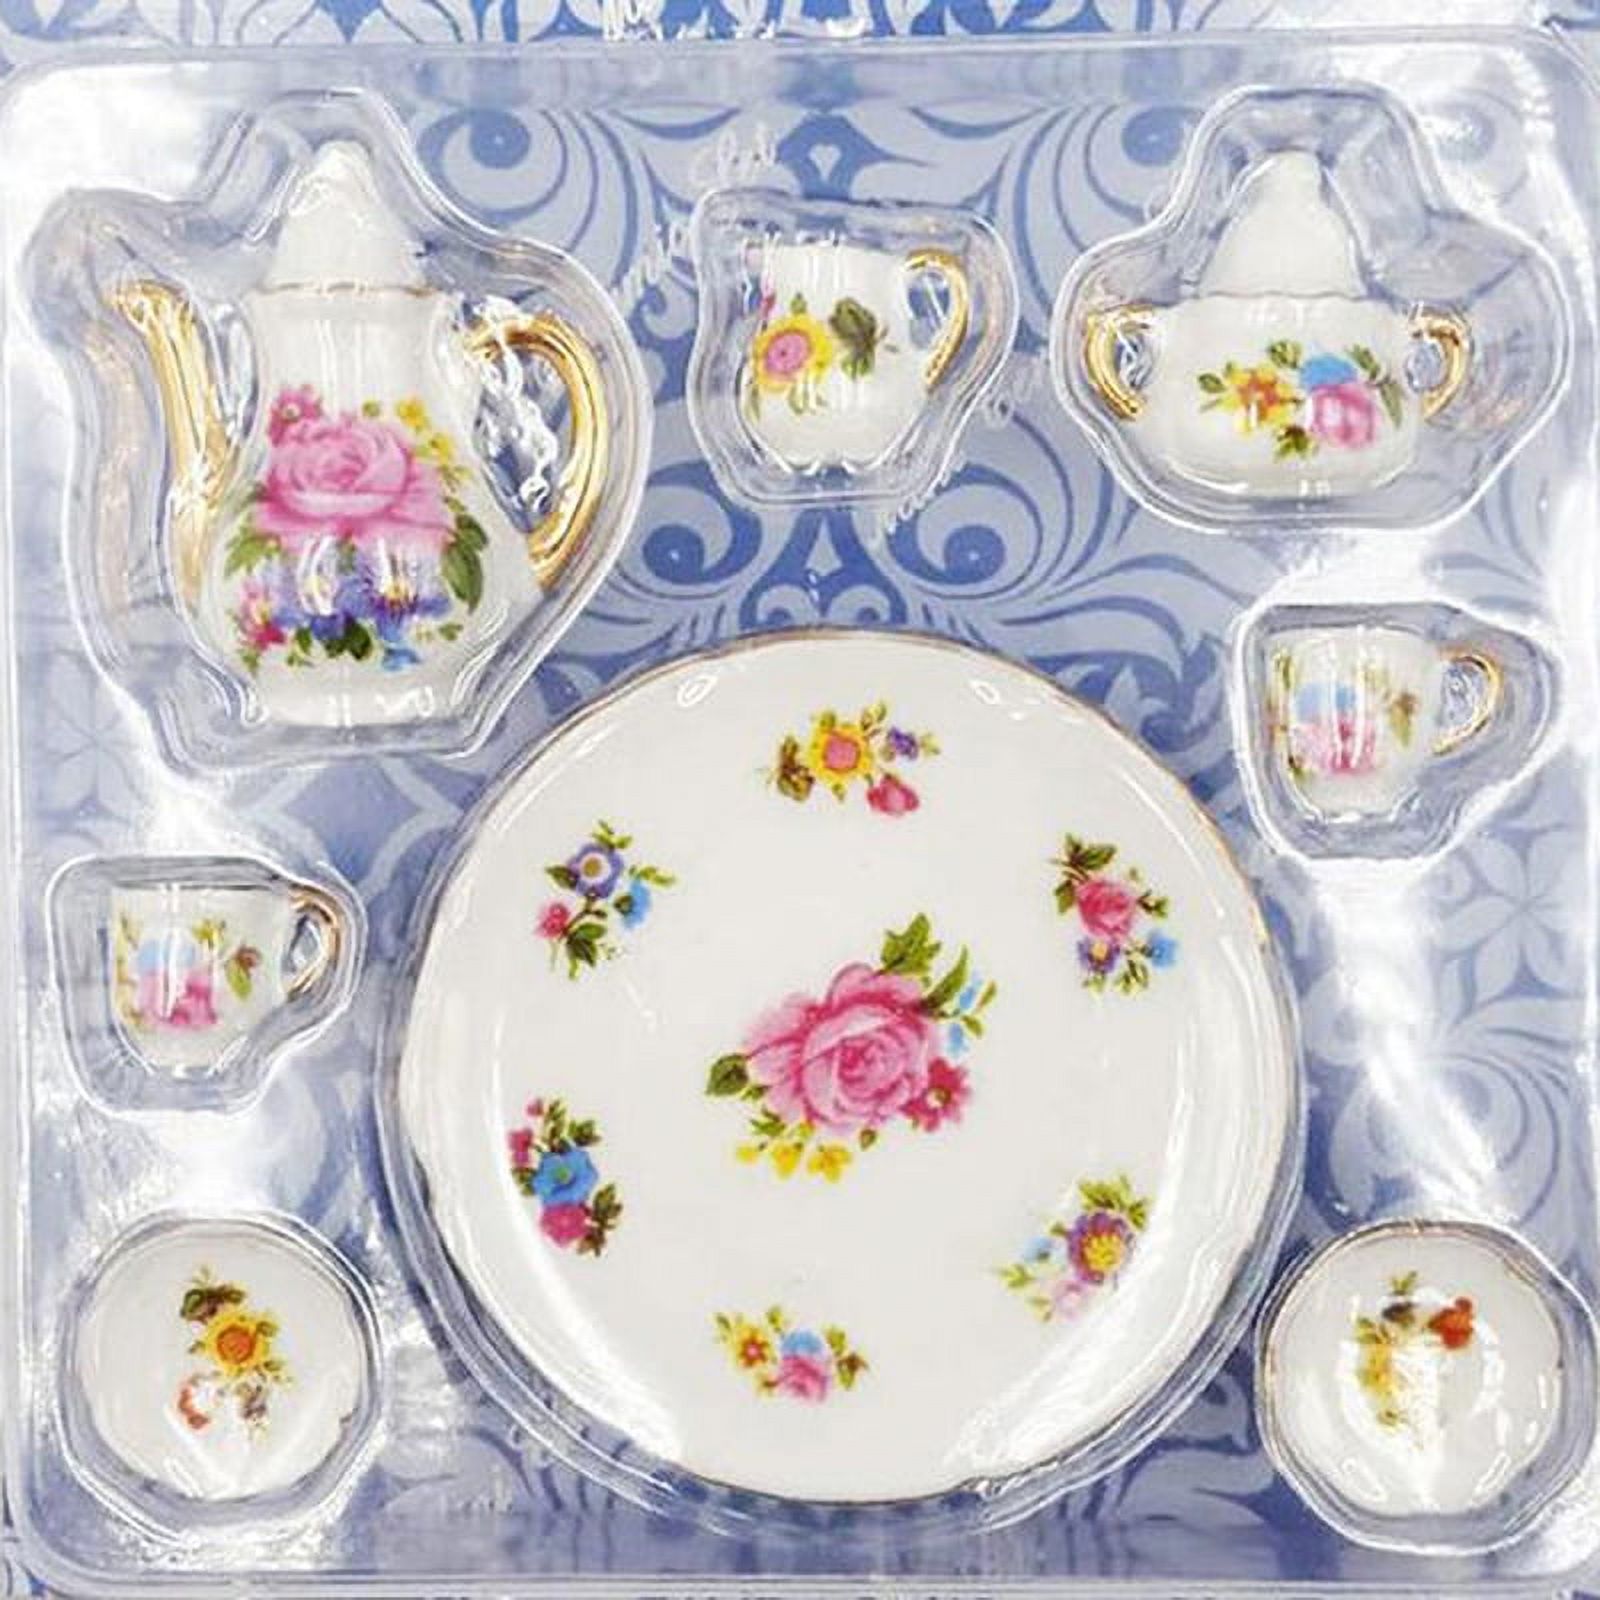 JETTINGBUY Dollhouse Miniature Dining Ware Porcelain; Tea Set Dish Cup Plate - image 3 of 4